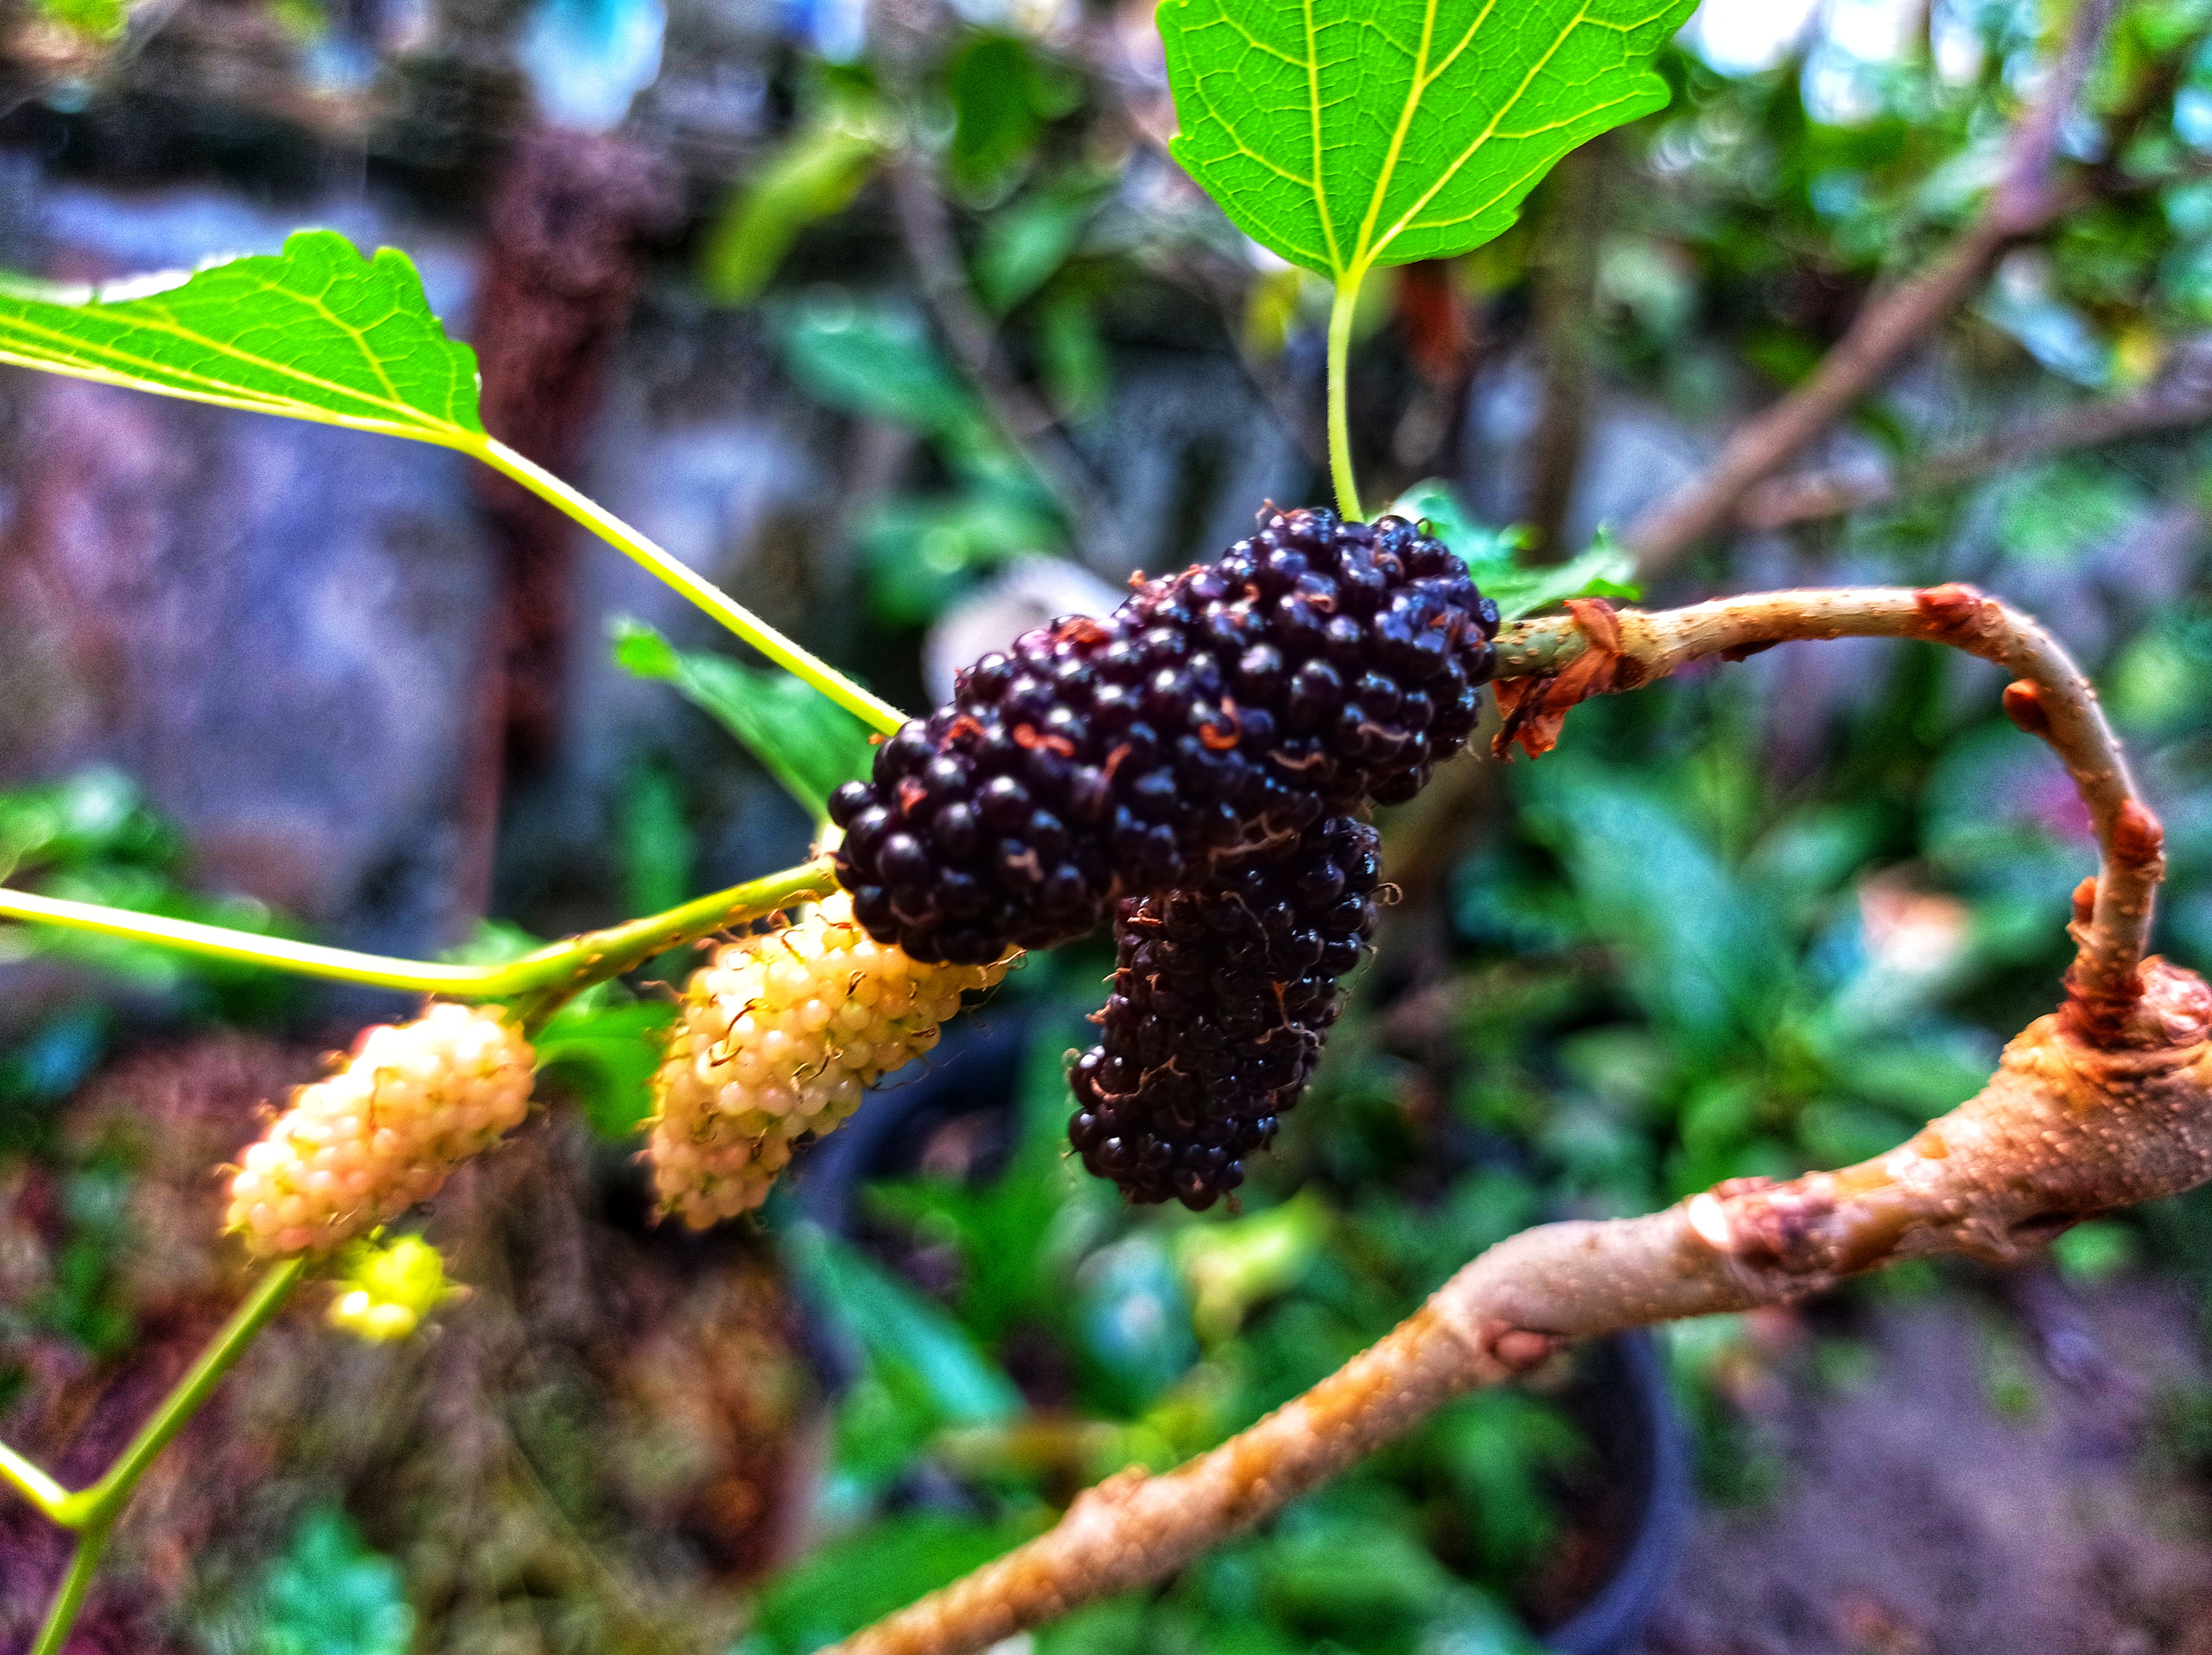 buah mulberry